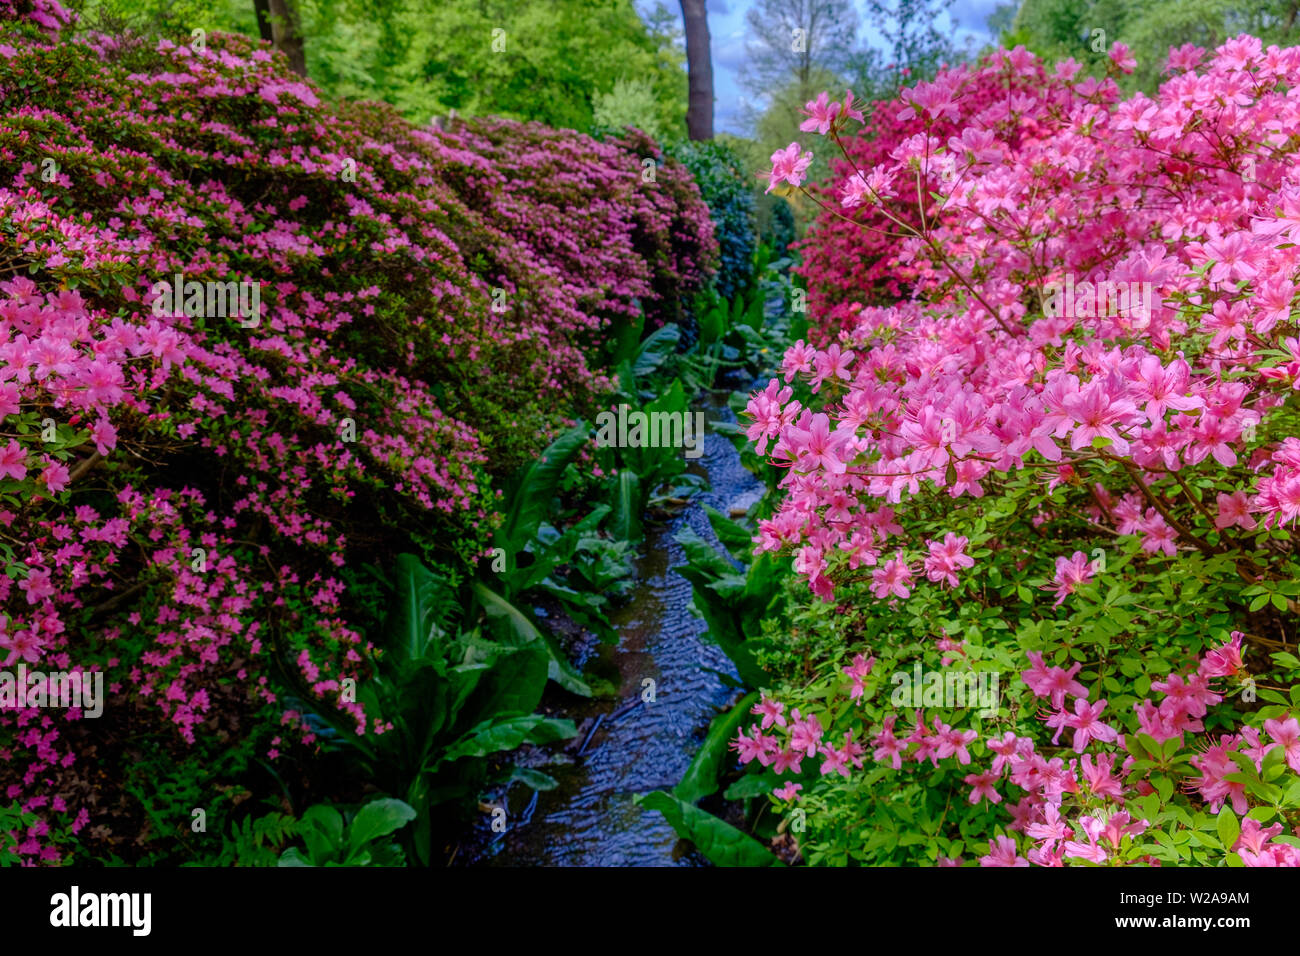 Stream lined with green foliage and pink and purple flowers in the Spring at Isabella Plantation in Richmond Park, Southwest London, England. Stock Photo